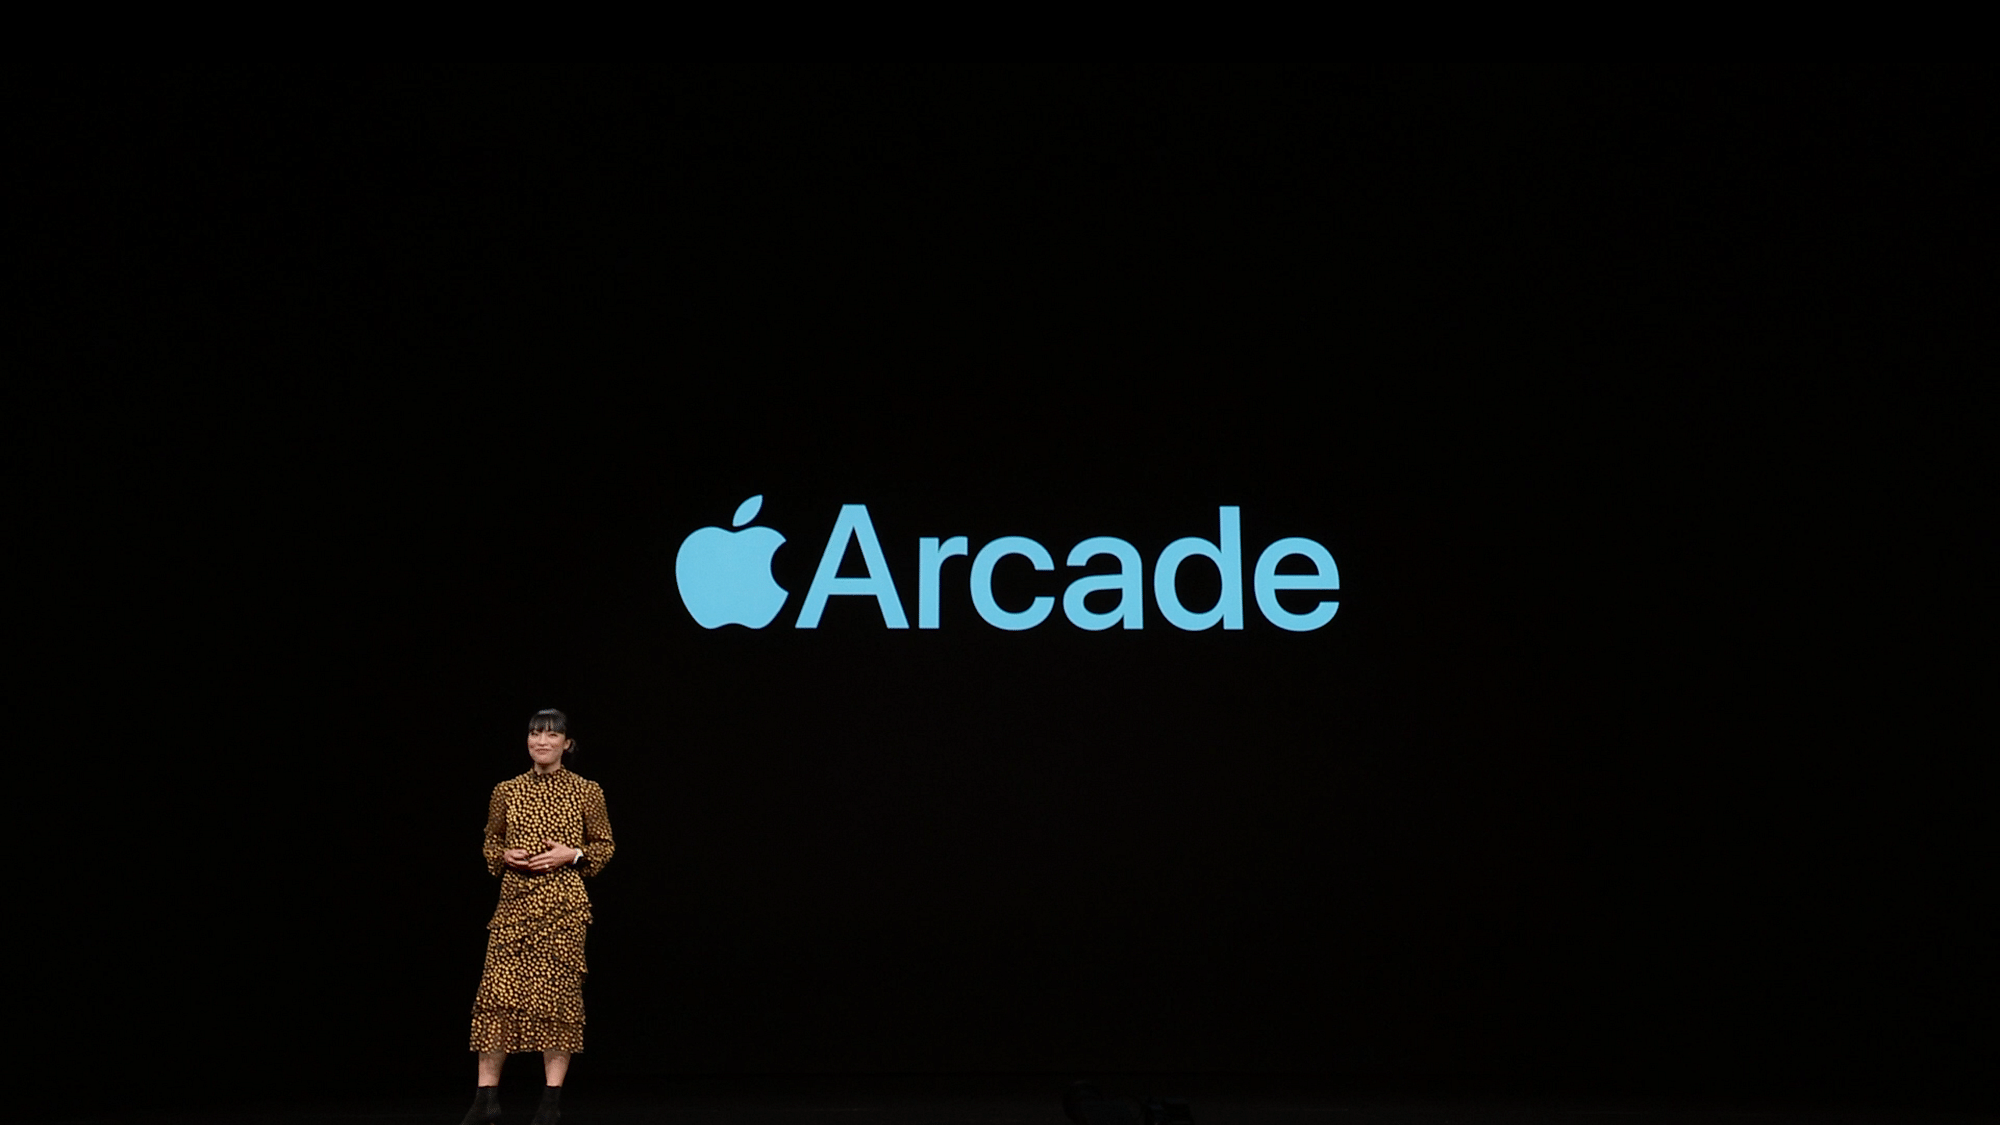 Apple has launched its premium gaming platform called Apple Arcade.